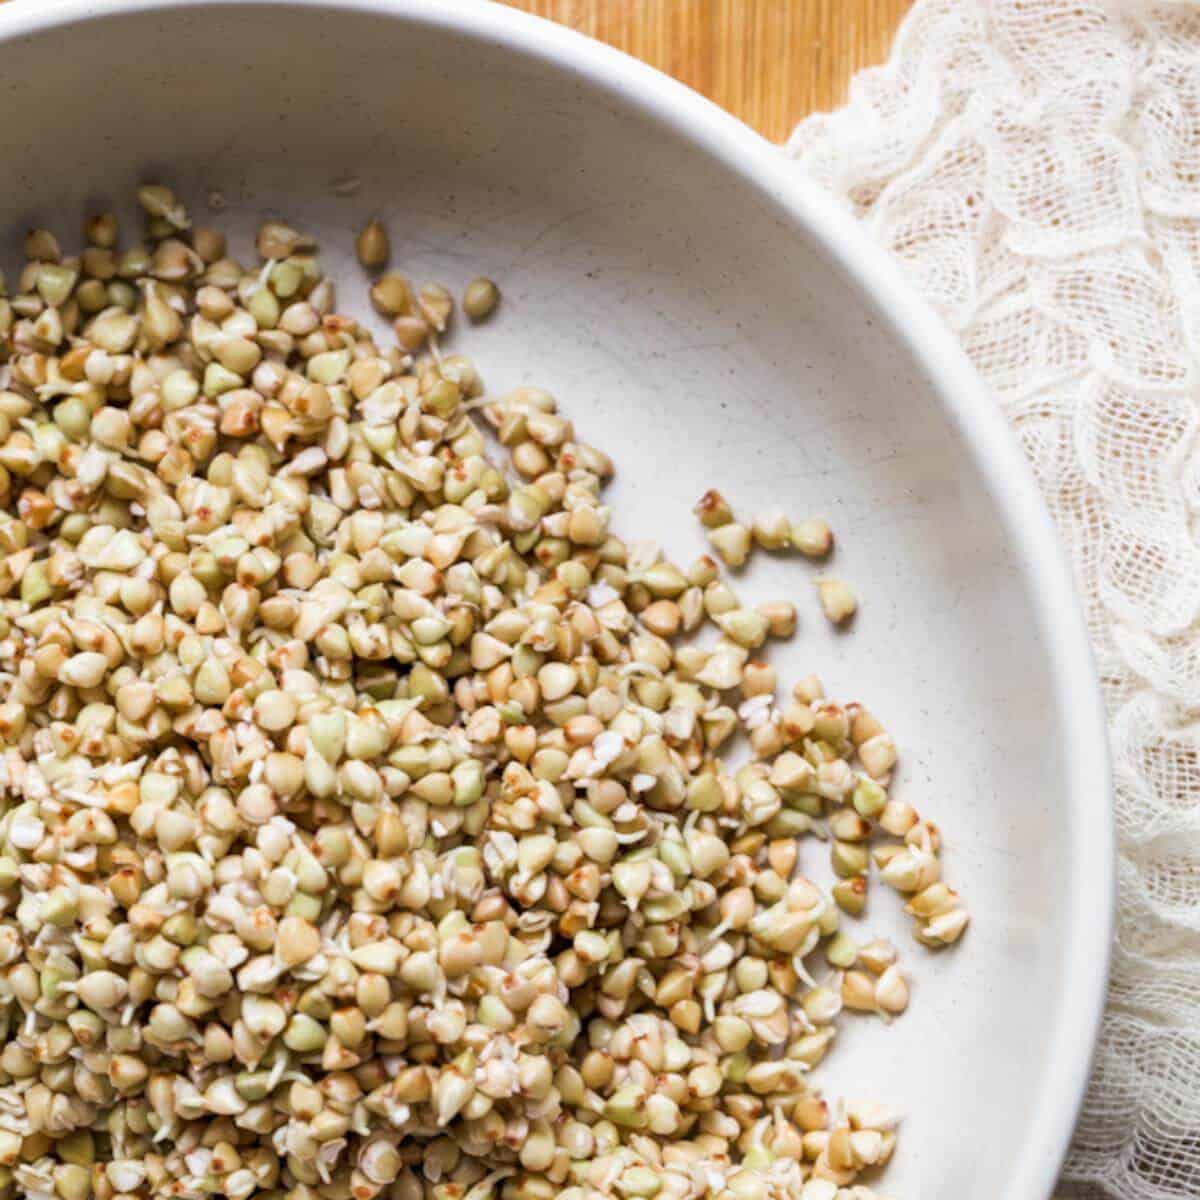 A bowl of sprouted buckwheat sits on a wooden surface next to a piece of cheesecloth.